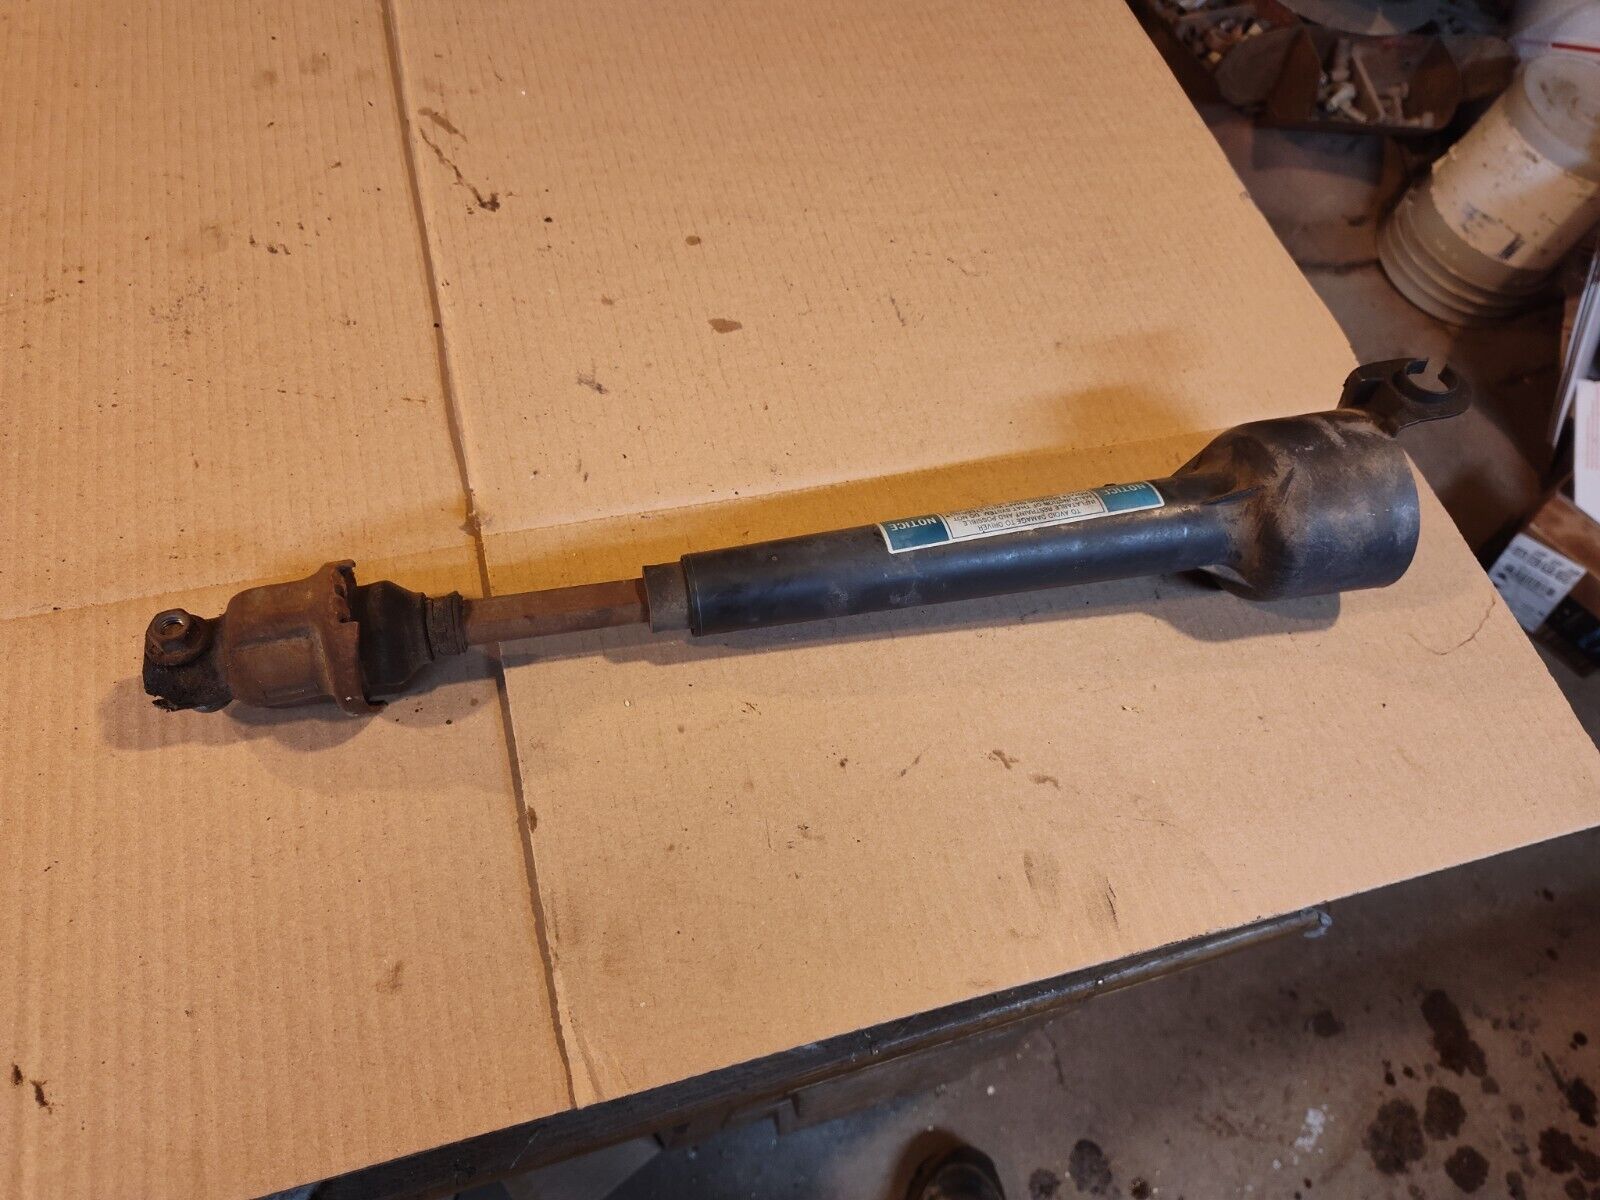 1994-1996 Chevy Caprice Impala SS Steering Shaft With Good Rubber Boot Complete